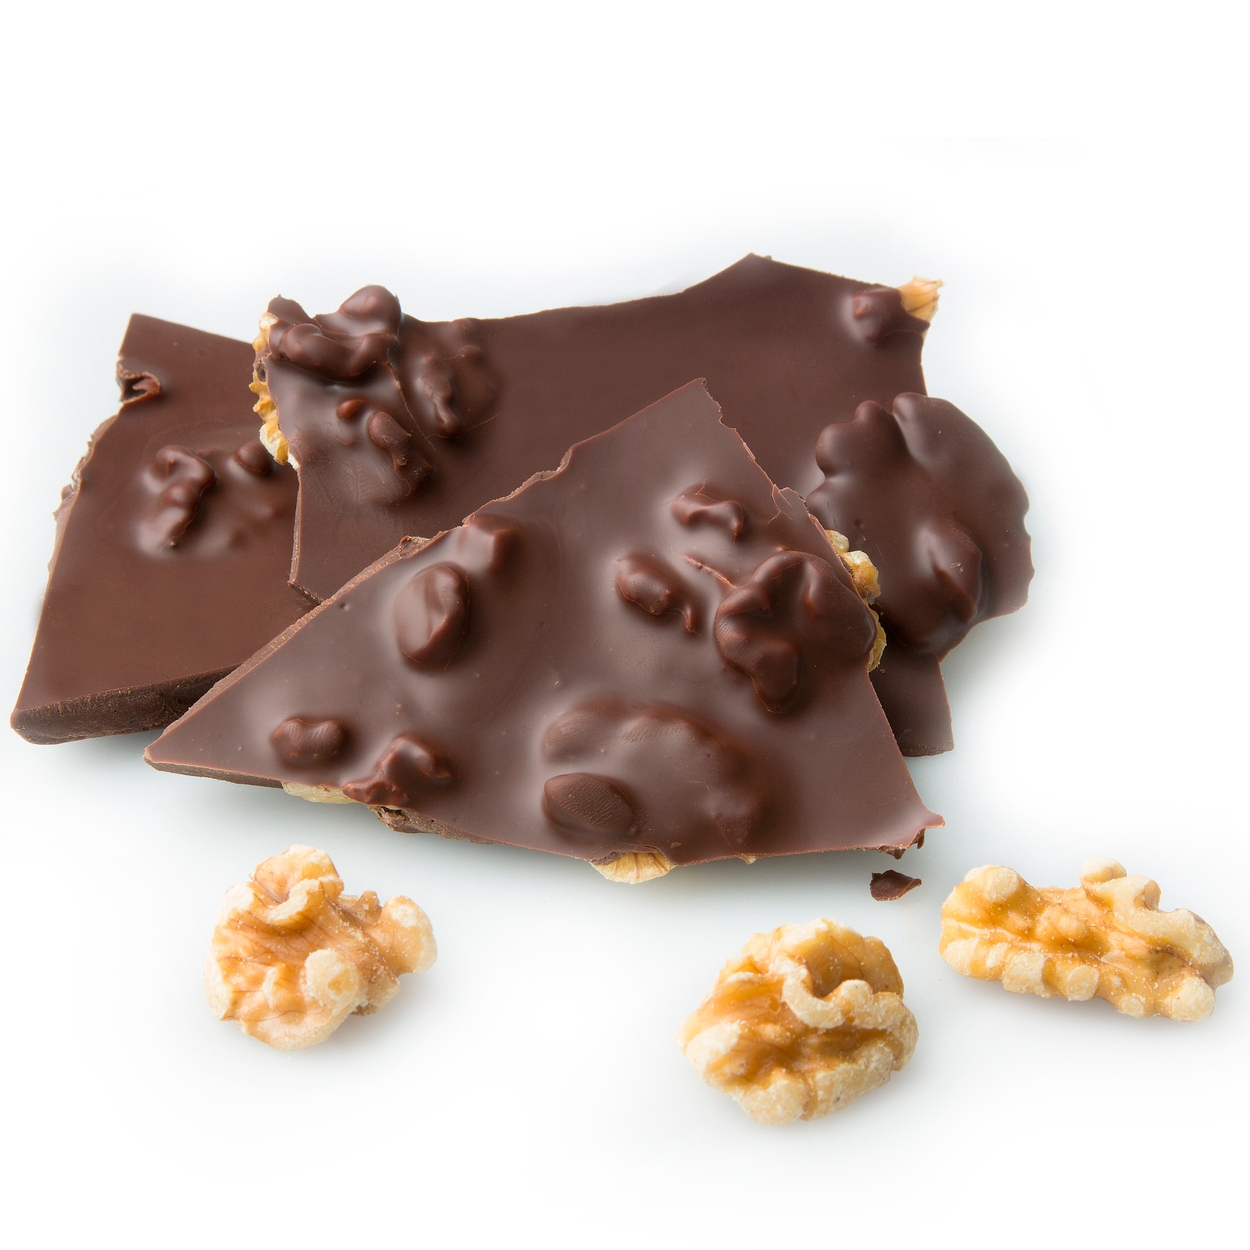 Sweet and Salty Chocolate Walnut Bark DelicioUS!